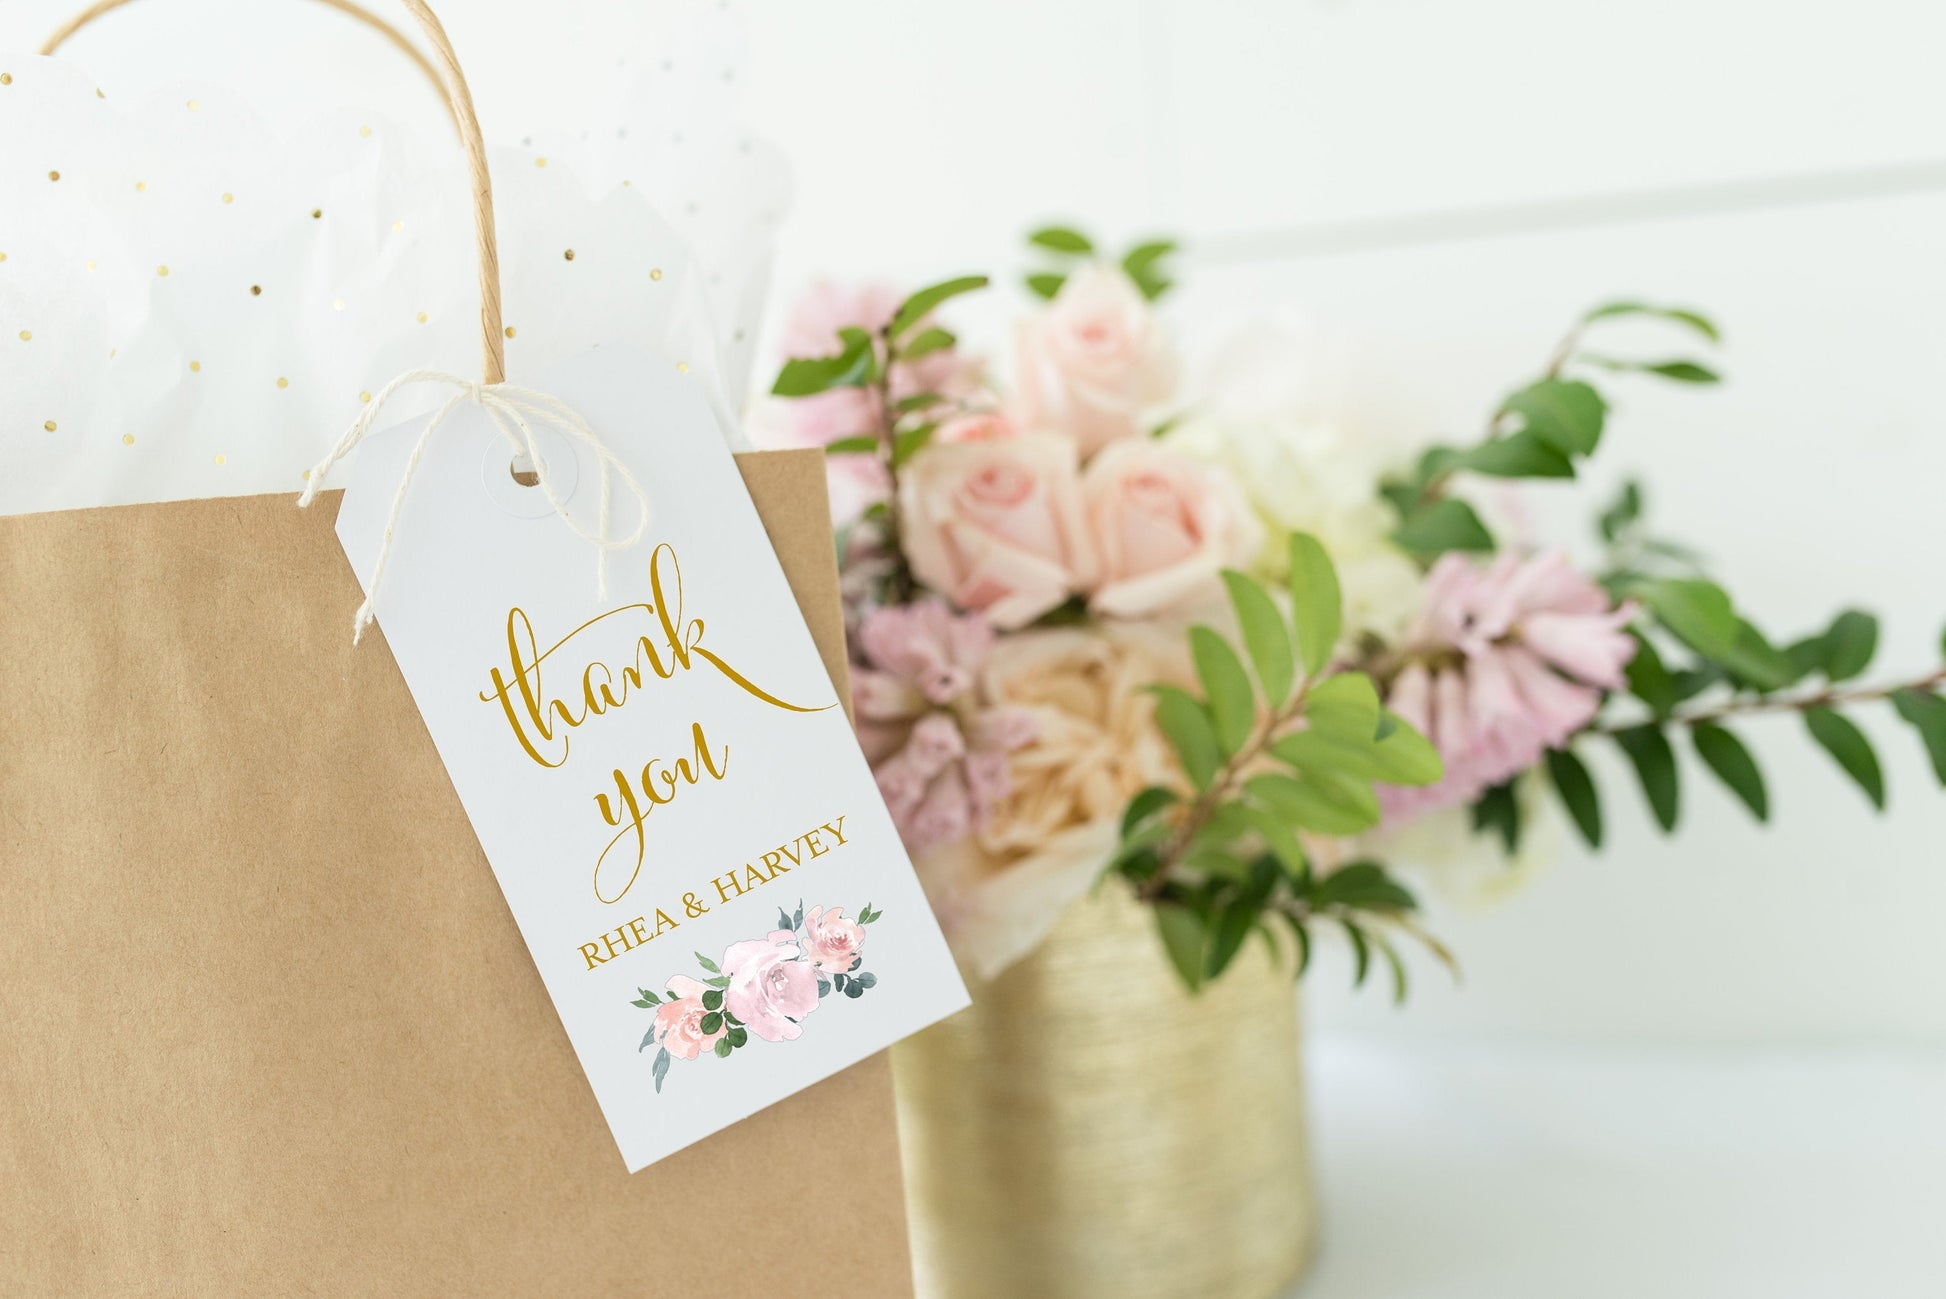 Printable Thank You Tags Template Wedding Bridal Shower Instant Download Dusty Blue Blush Floral gold 100% Editable- Rhea TAGS | TY | INSERTS SAVVY PAPER CO